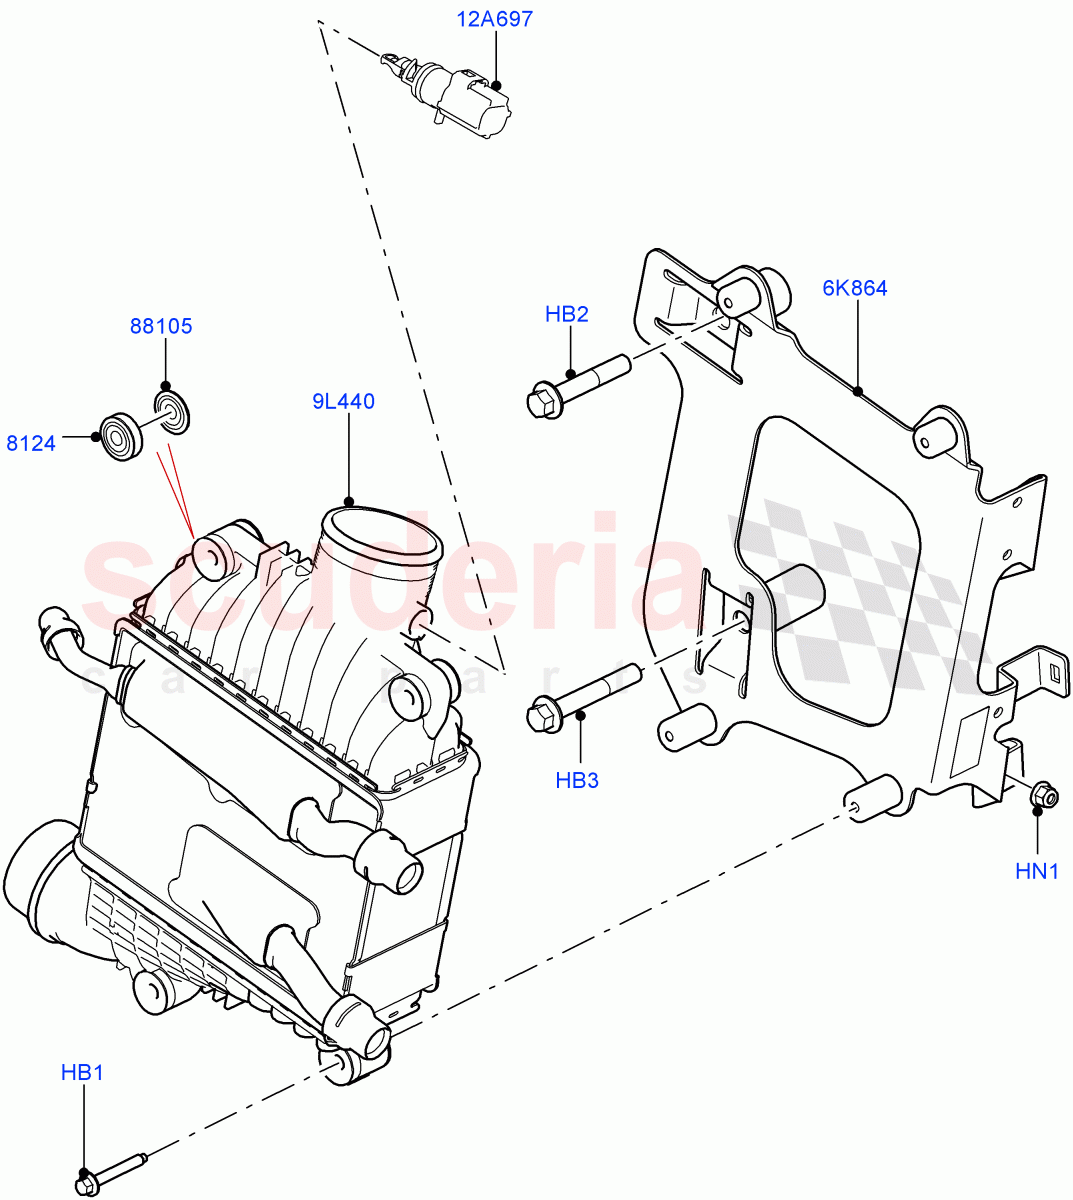 Intercooler/Air Ducts And Hoses(Solihull Plant Build)(2.0L I4 DSL HIGH DOHC AJ200,2.0L I4 DSL MID DOHC AJ200)((V)FROMHA000001) of Land Rover Land Rover Range Rover Sport (2014+) [2.0 Turbo Diesel]